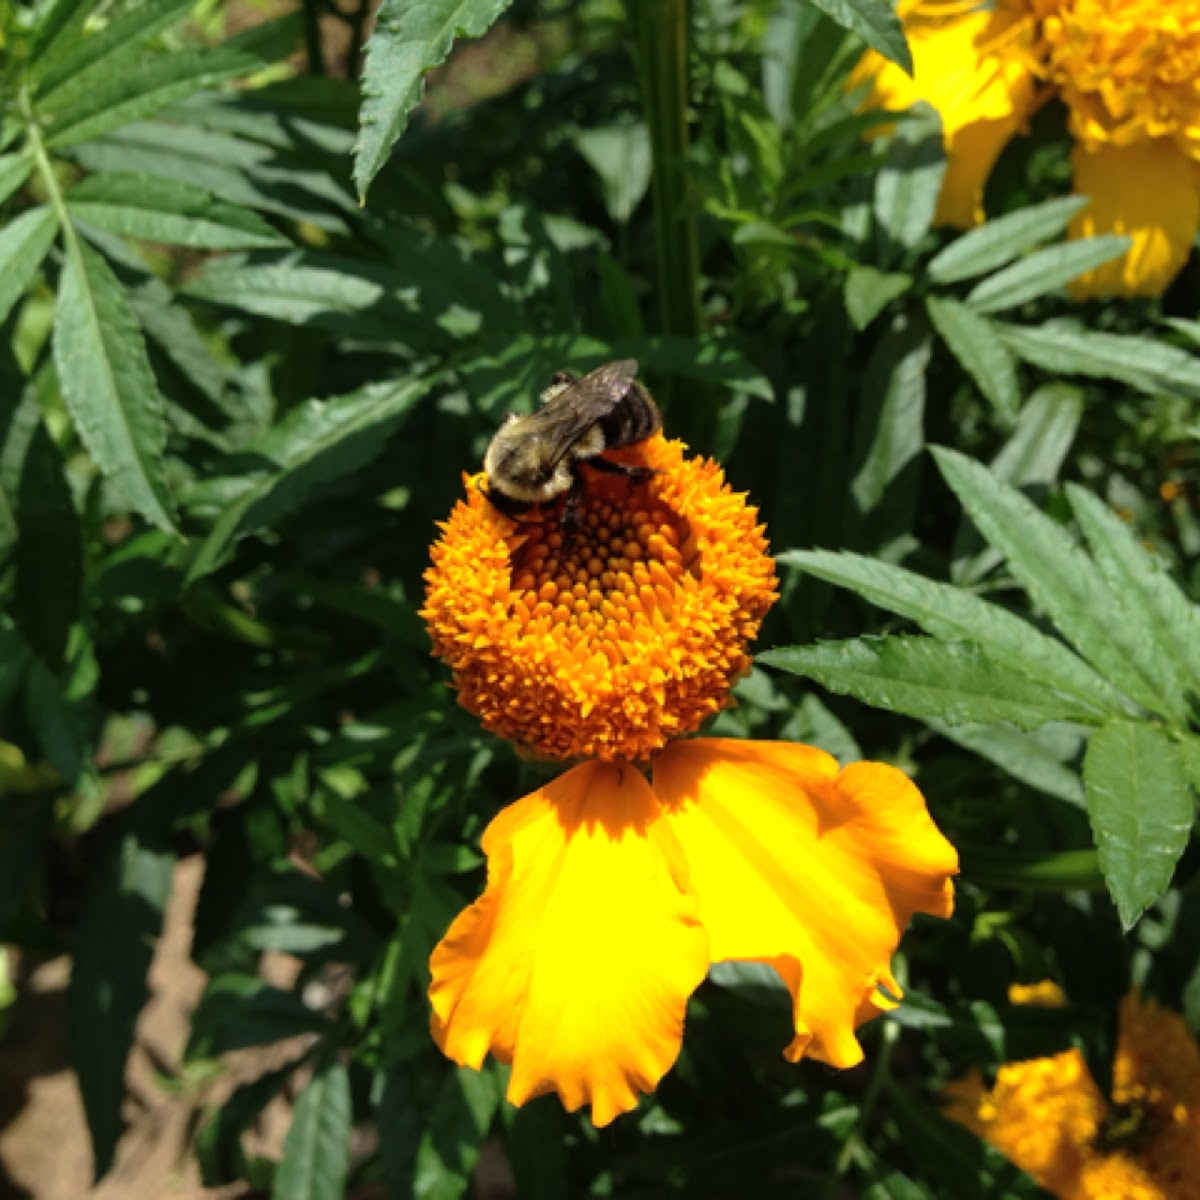 French Marigold and Bumblebee